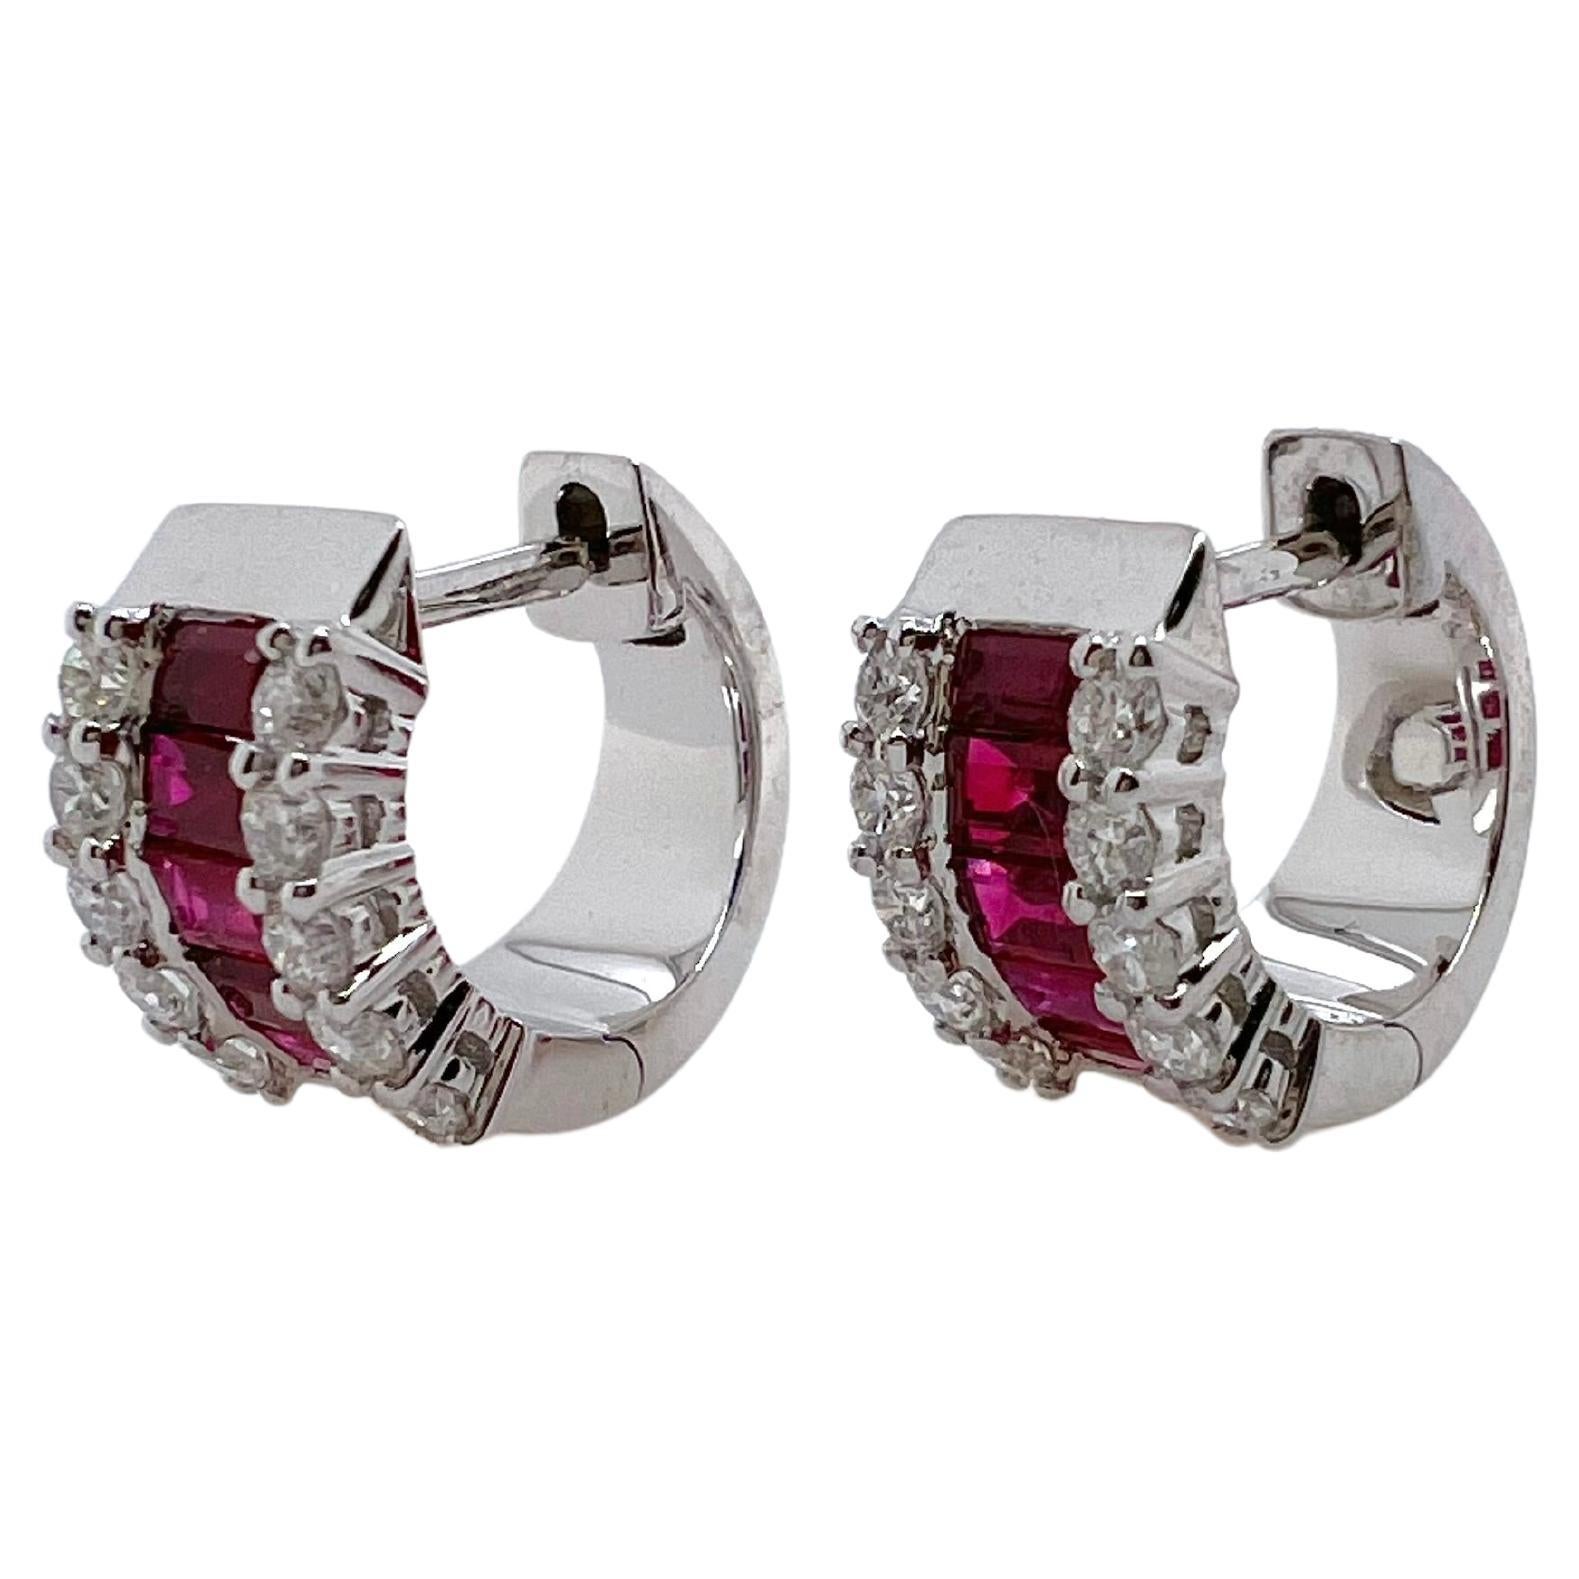 These are perfect for daily wear and add some color to your life.  The easy to wear huggie earrings are designed to hug the ear lobes and can be worn casually or for smart casual events.  The ruby baguettes are channeled set and the round brilliant